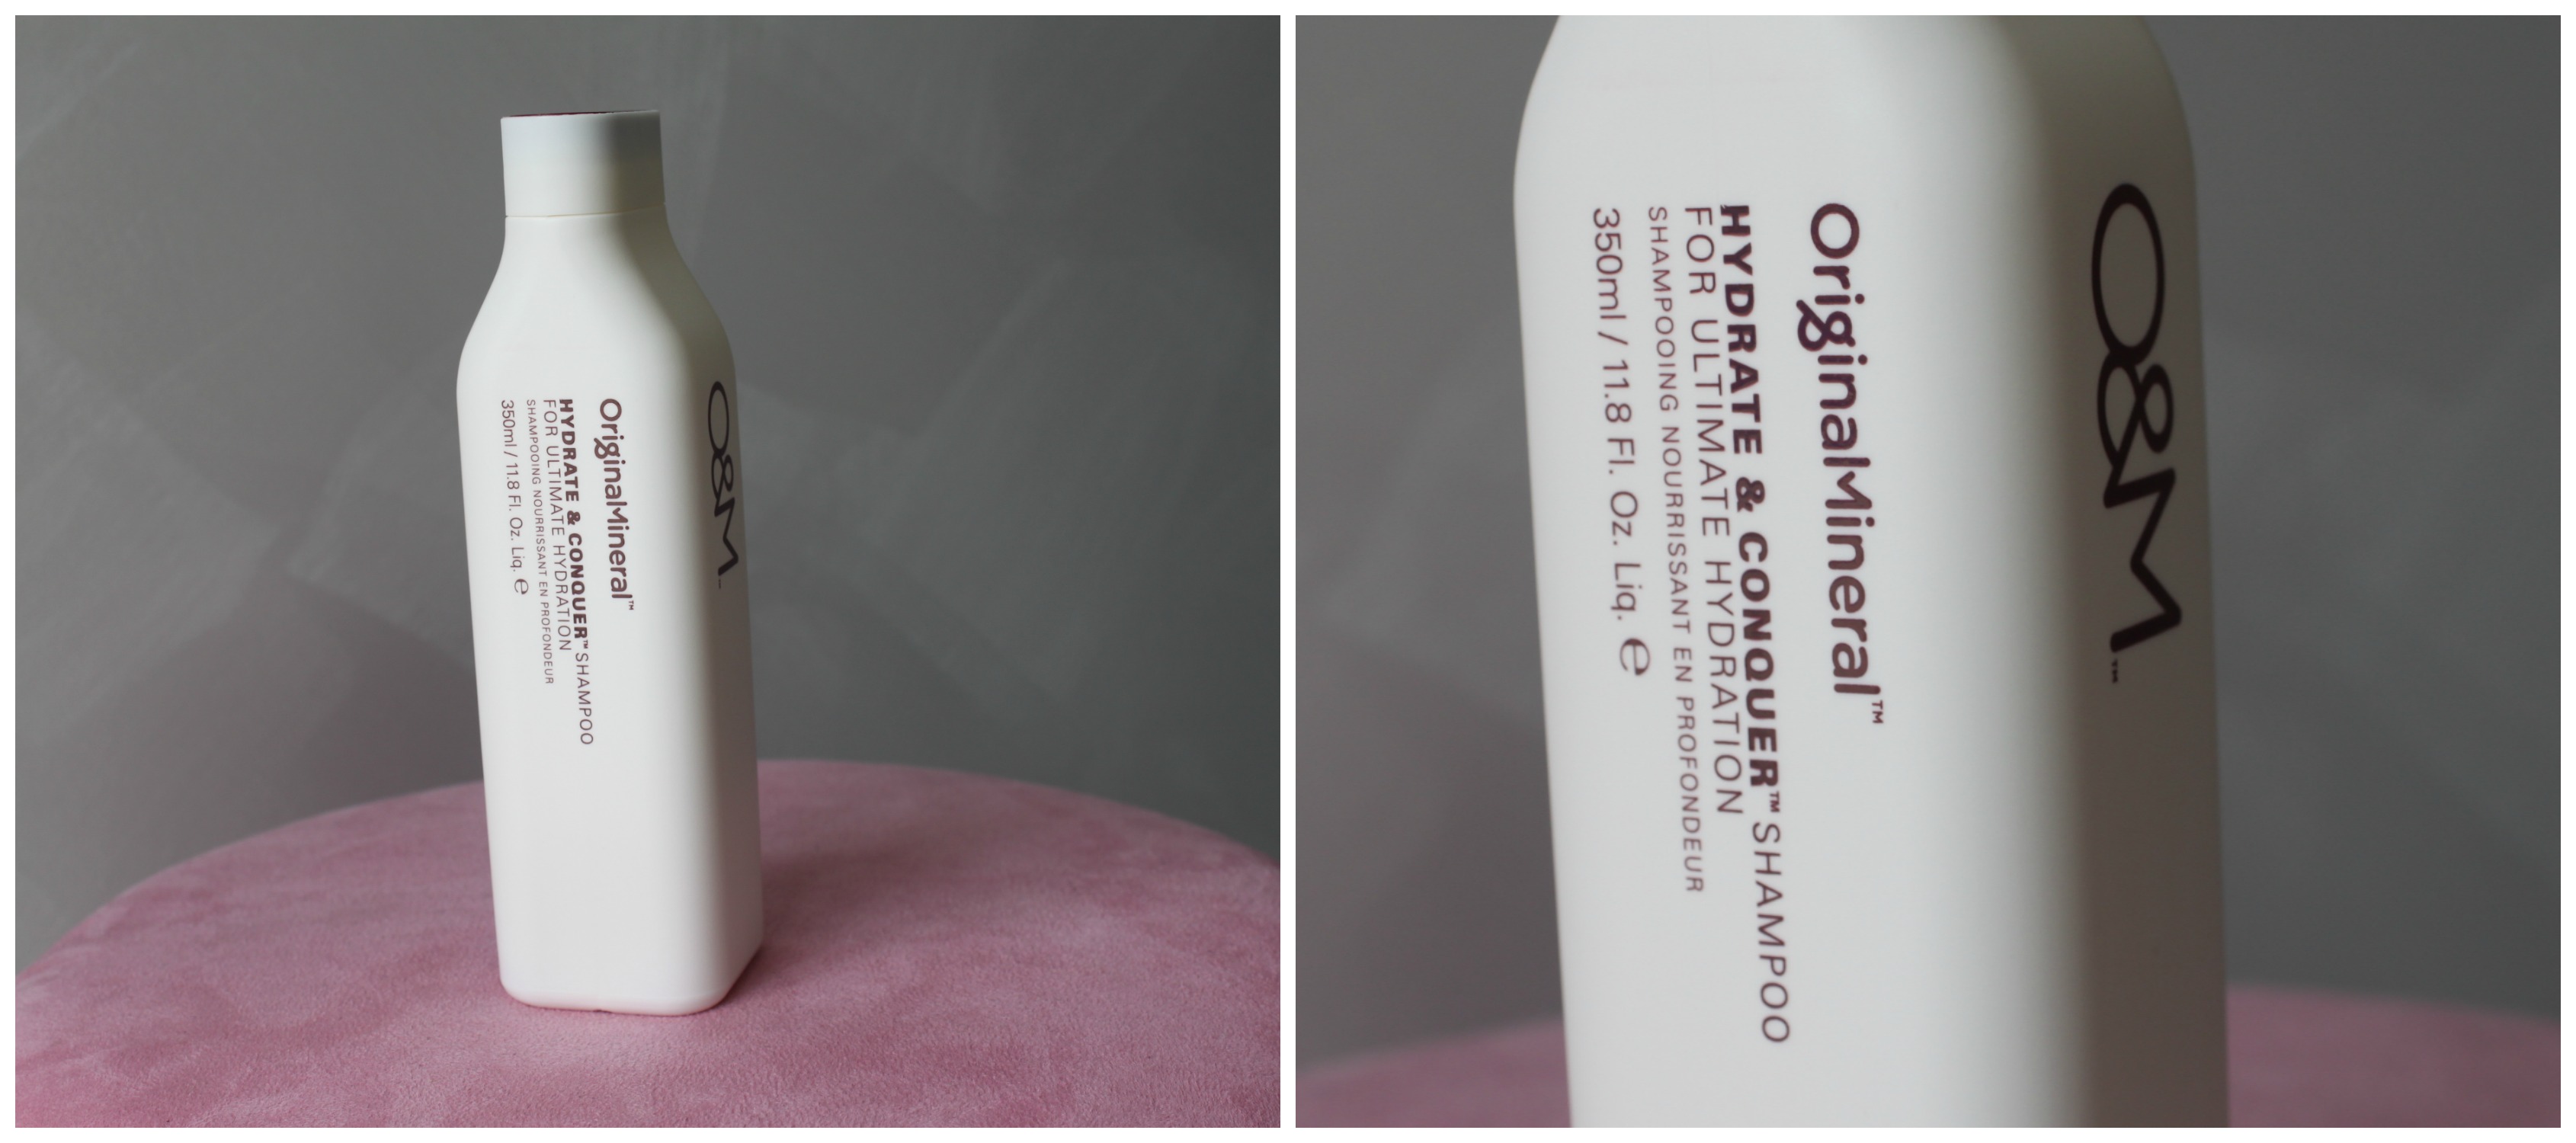 OriginalMineral O&M Original and mineral haircare hair shampoo honest opinion australian beauty review ausbeautyreview blog blogger